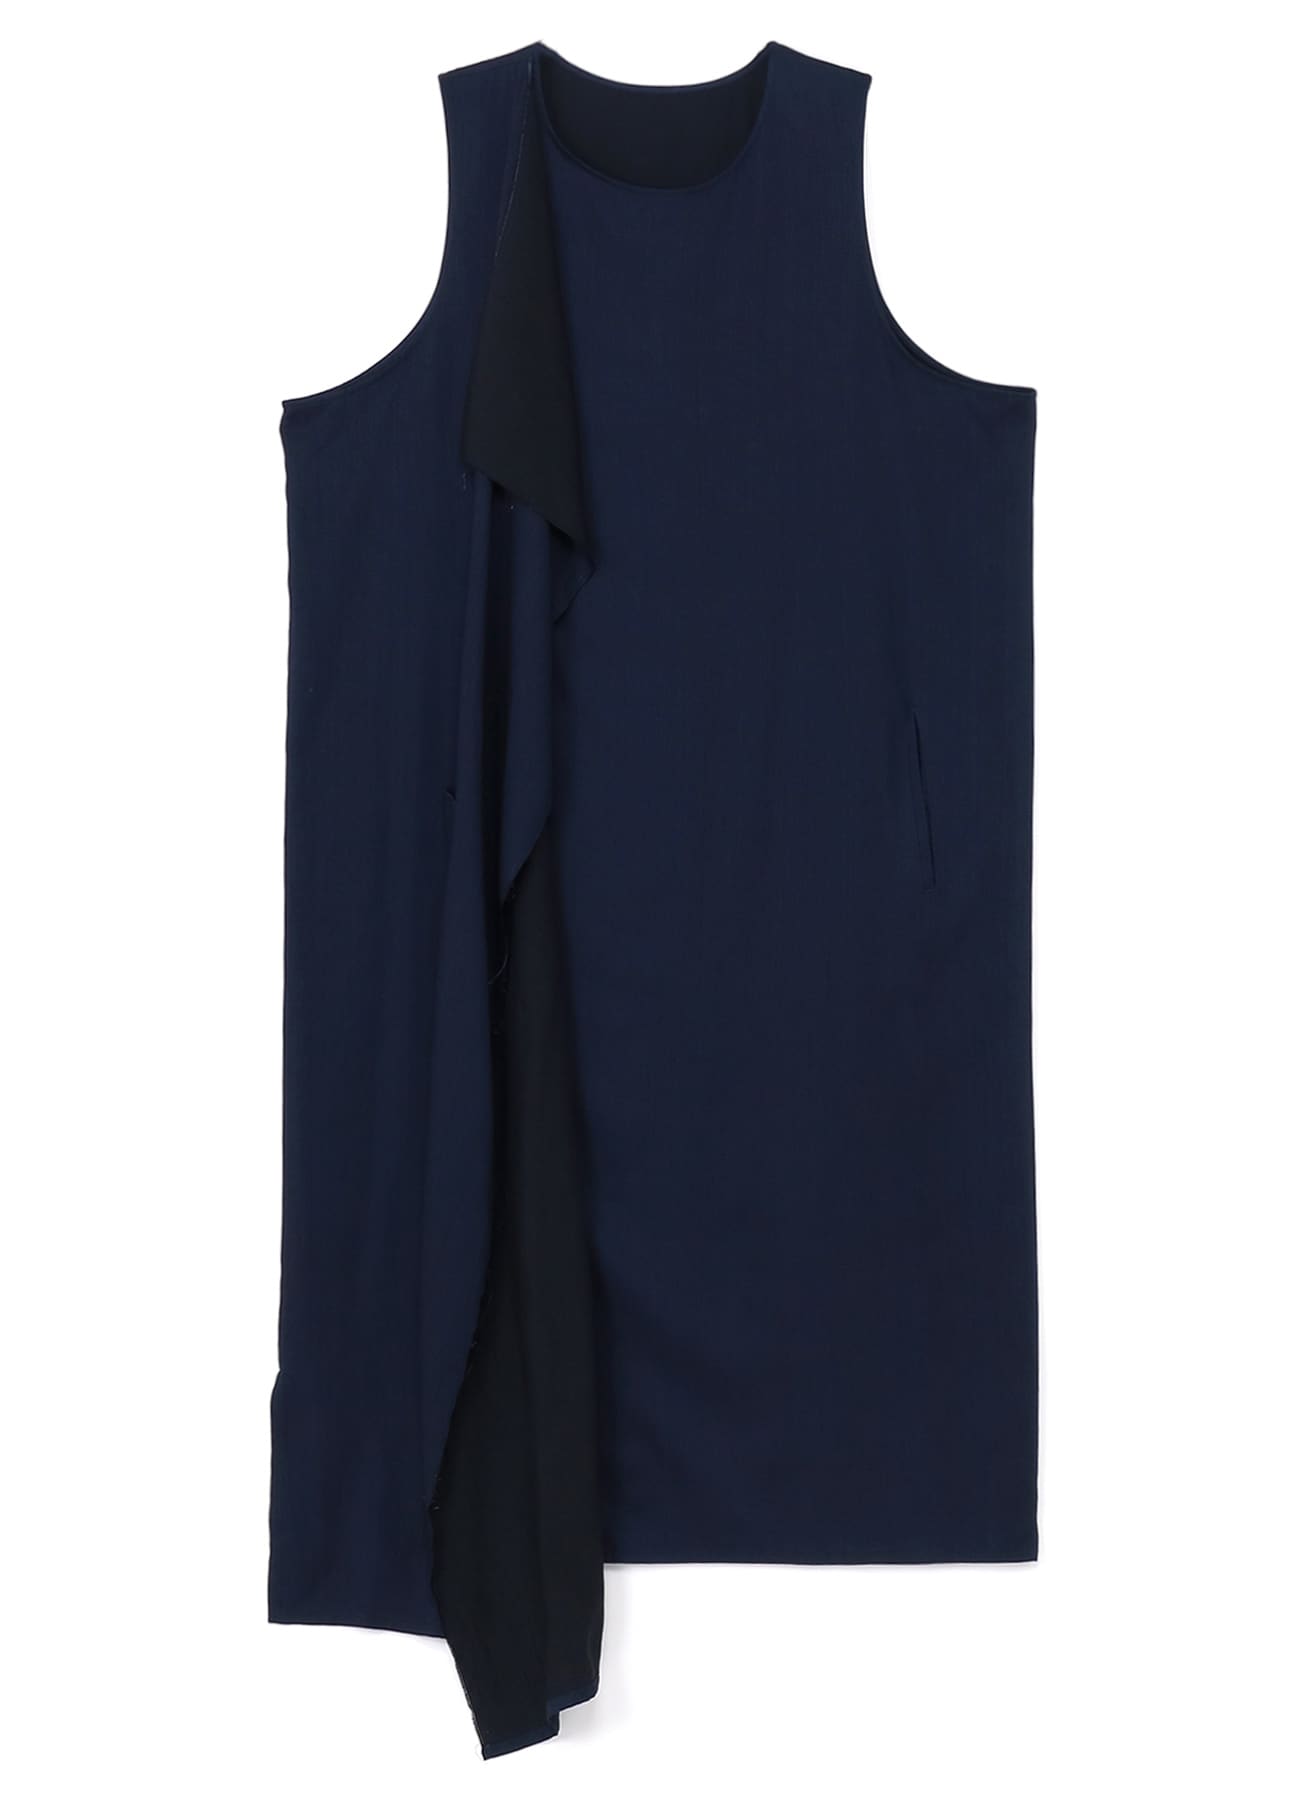 CUPRO DUNGAREE TWILL RIGHT FLAP DRESS(XS Navy): Vintage 1.1｜THE 